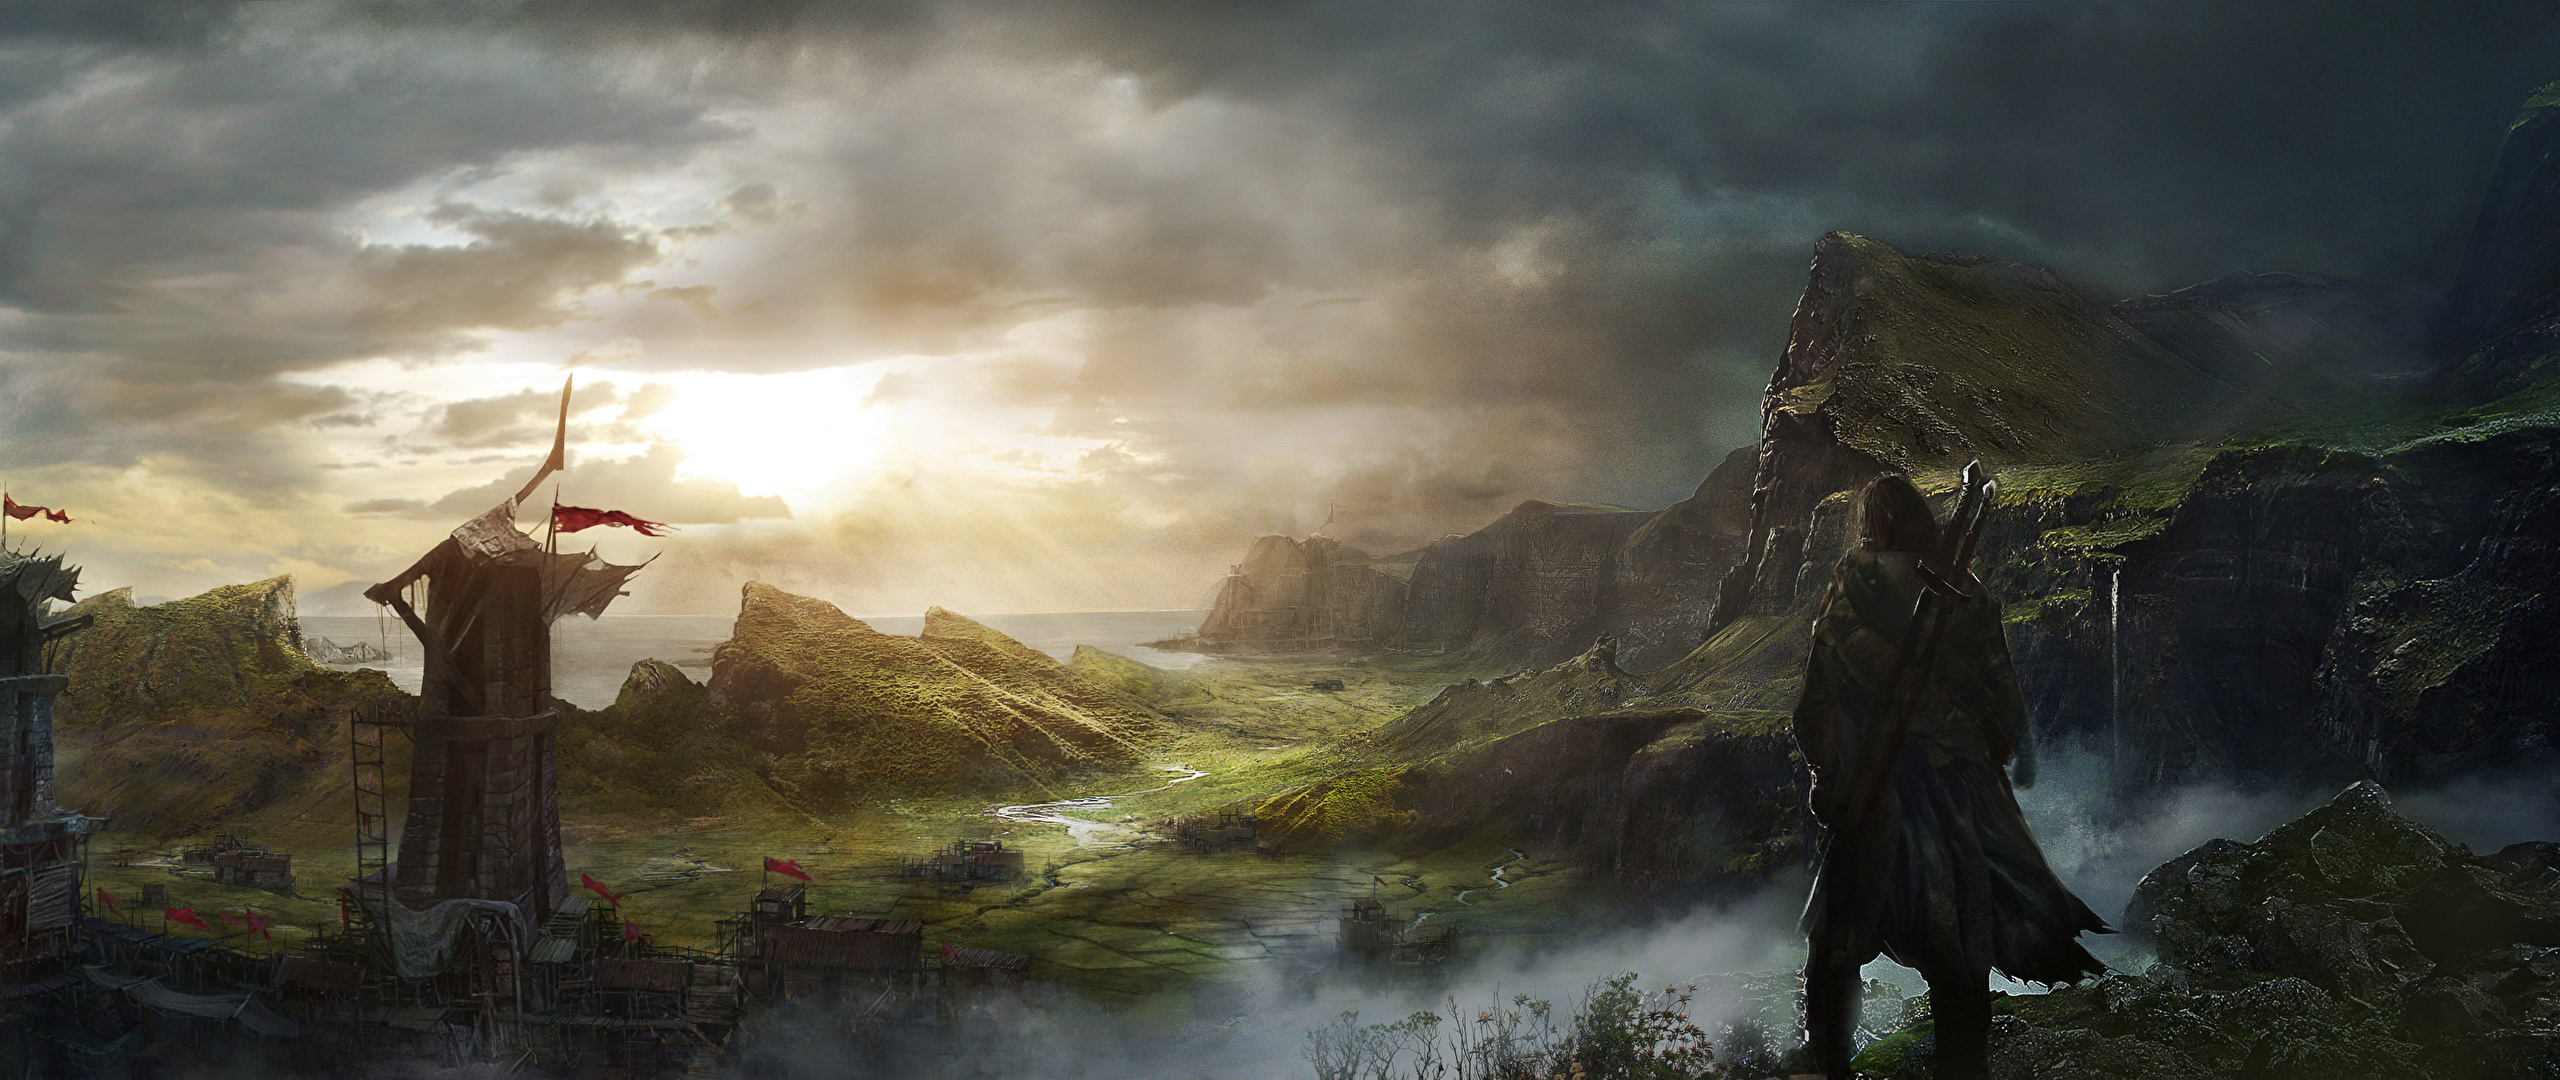 Middle Earth Wallpaper 2 by JohnnySlowhand on DeviantArt